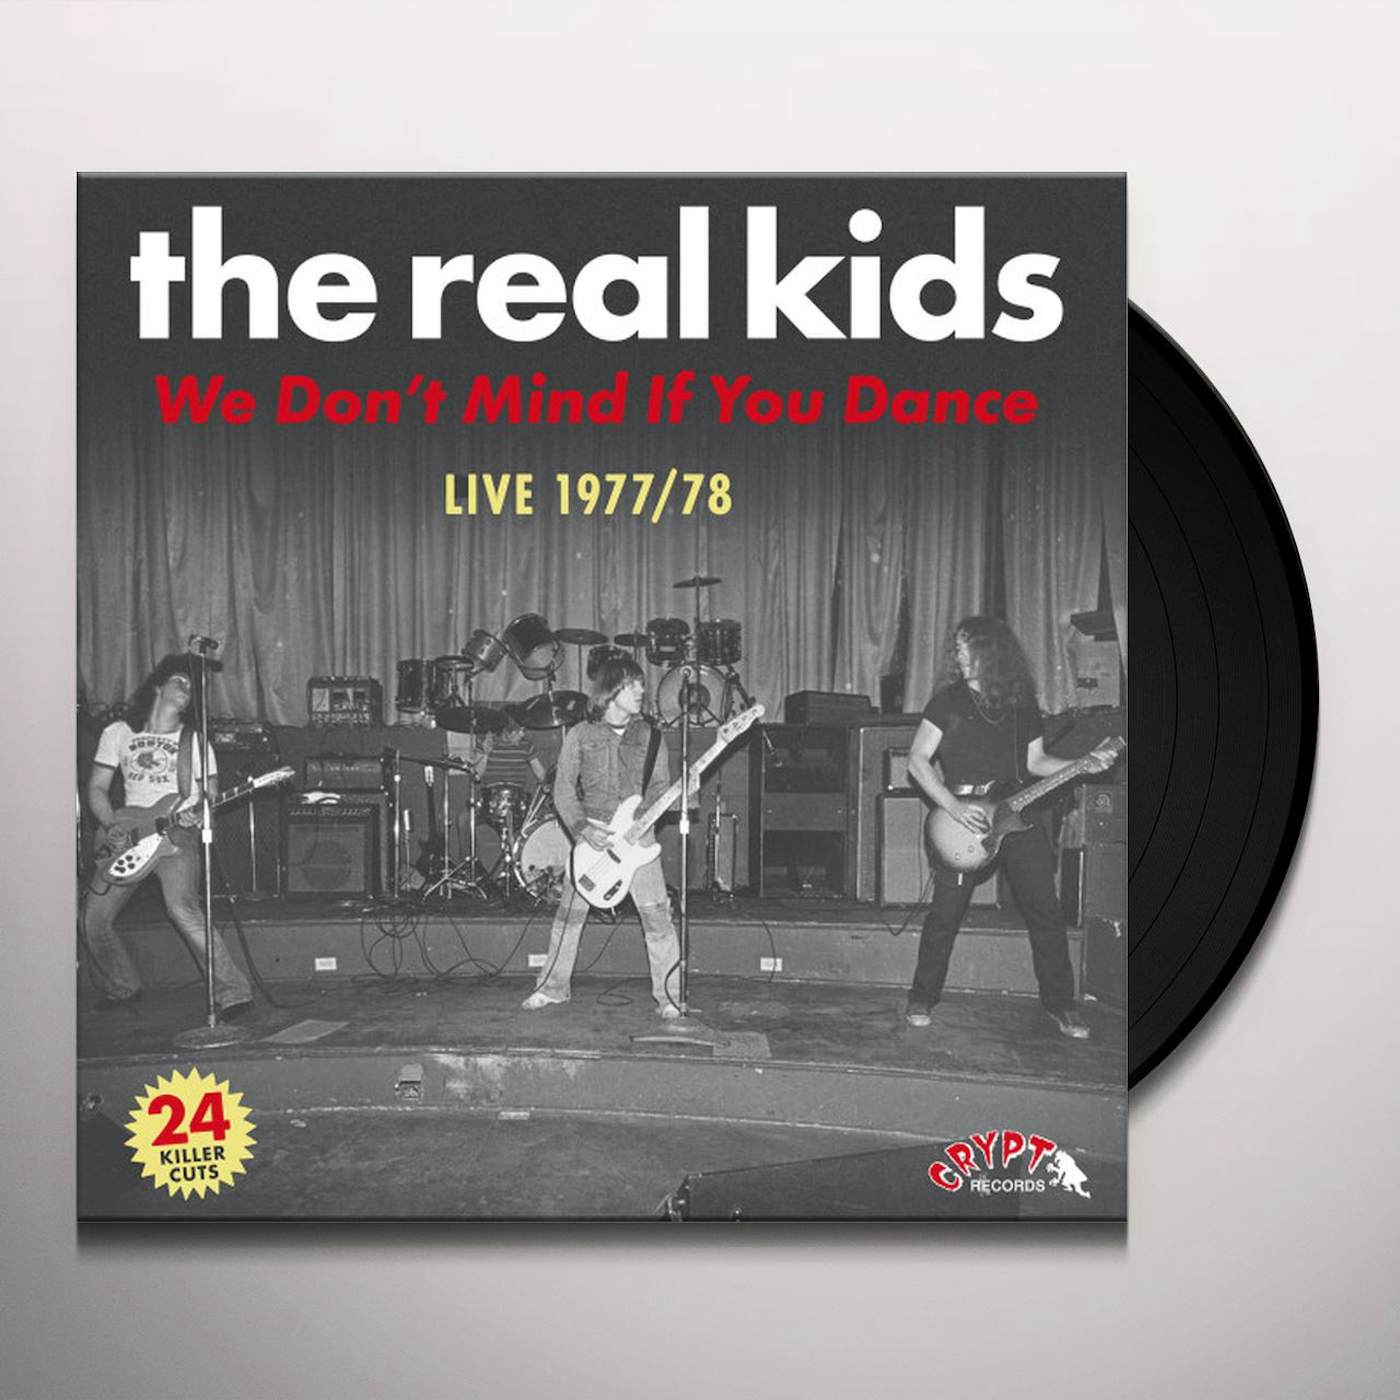 The Real Kids WE DON'T MIND IF YOU DANCE (2LP/GATEFOLD/LINER NOTES/PHOTOS/24 PREVIOUSLY UNISSUED CUTS) Vinyl Record